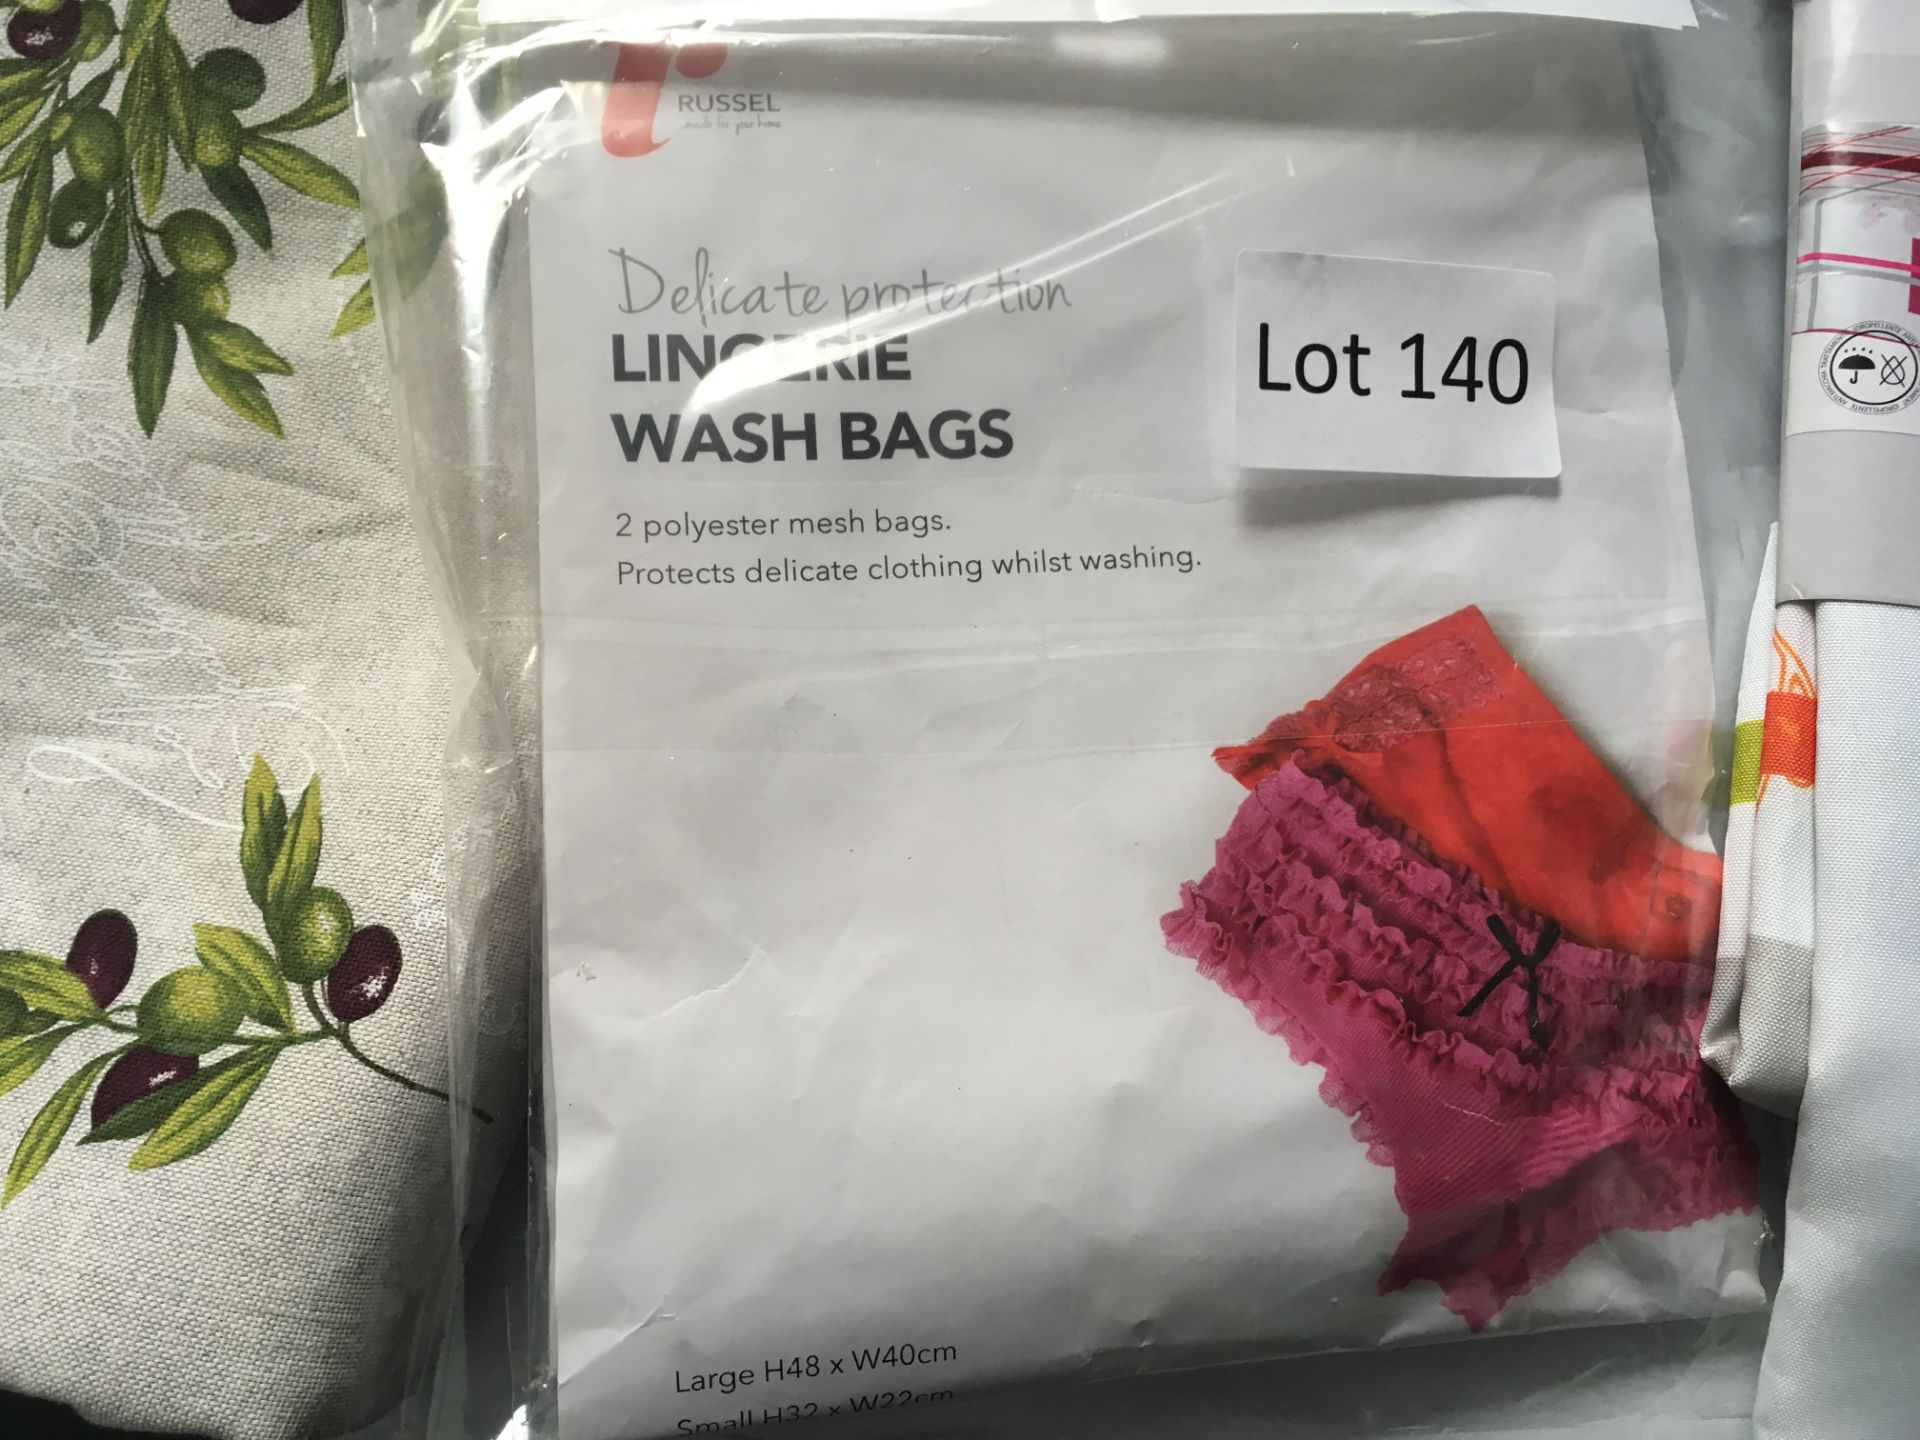 Delicate protection lingerie wash bags x 2. New.